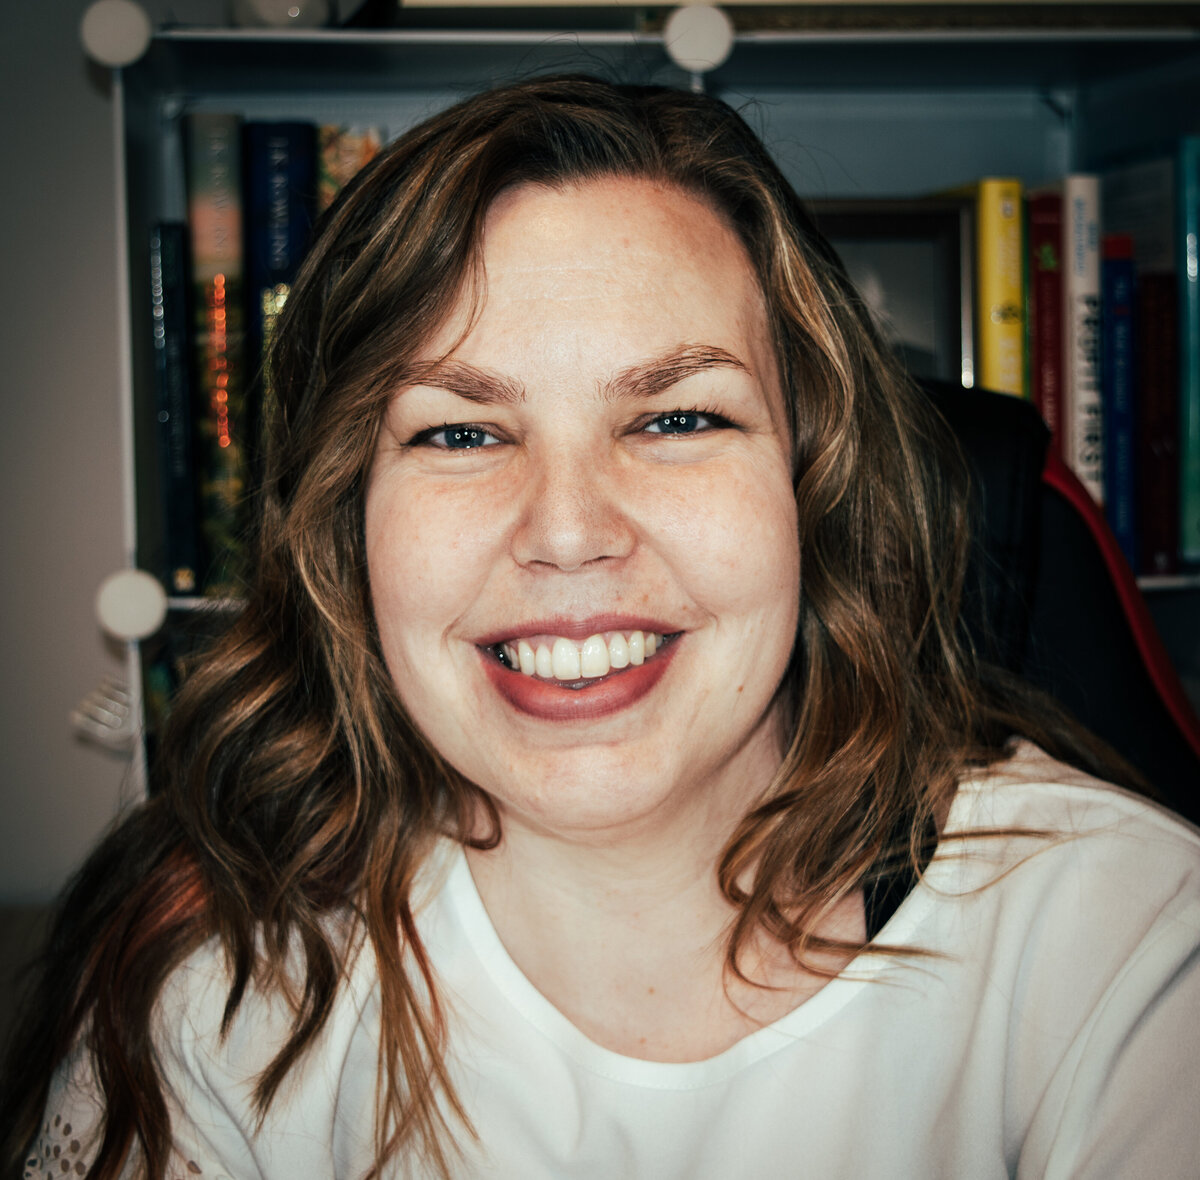 A woman smiling in front of a book shelf.